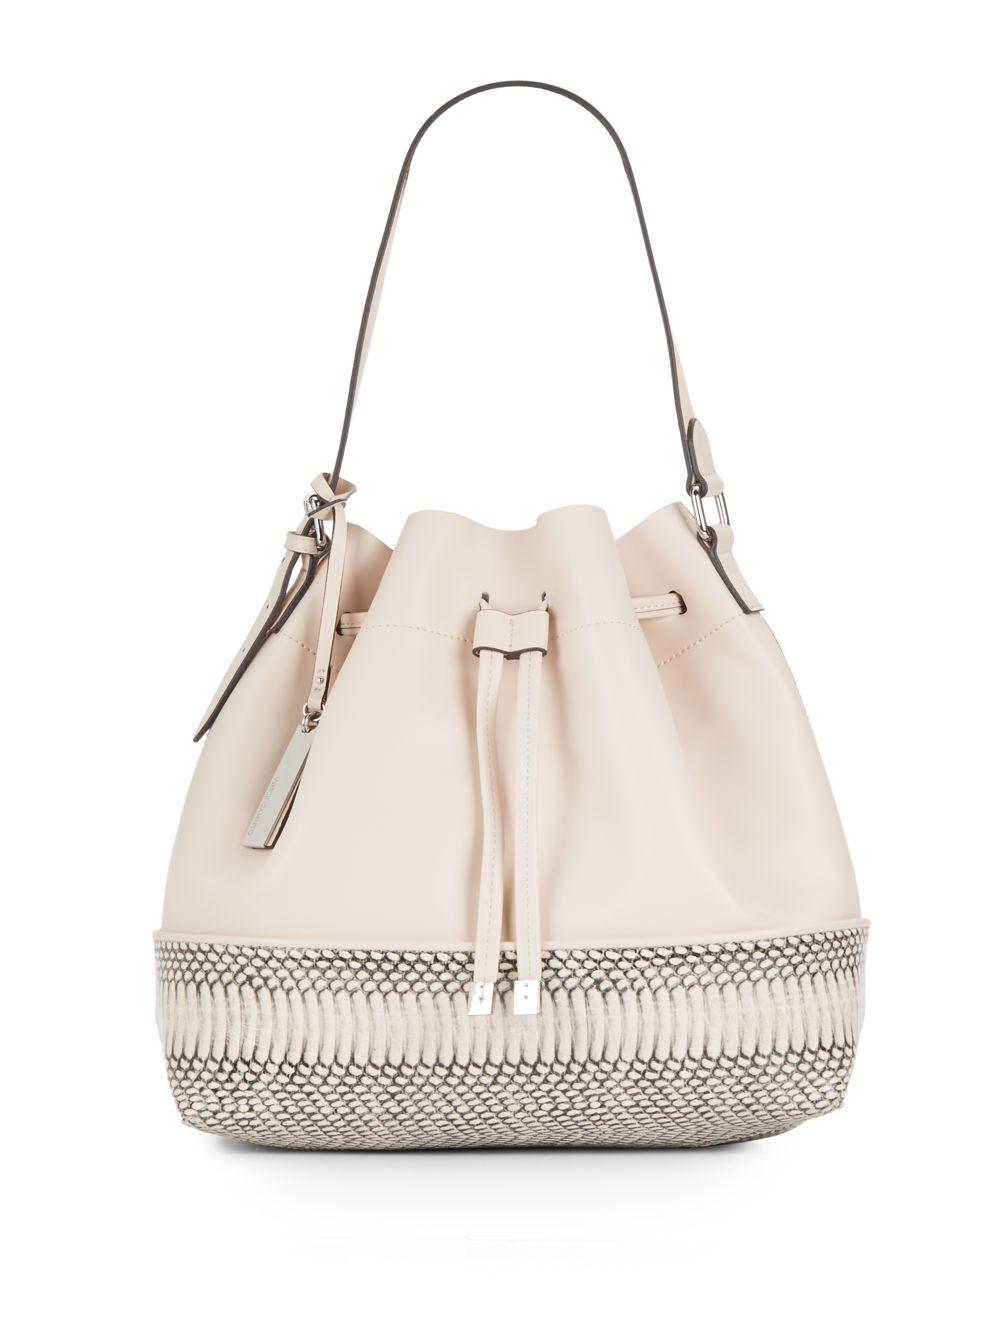 Vince Camuto Leila Leather Bucket Bag In White Lyst 